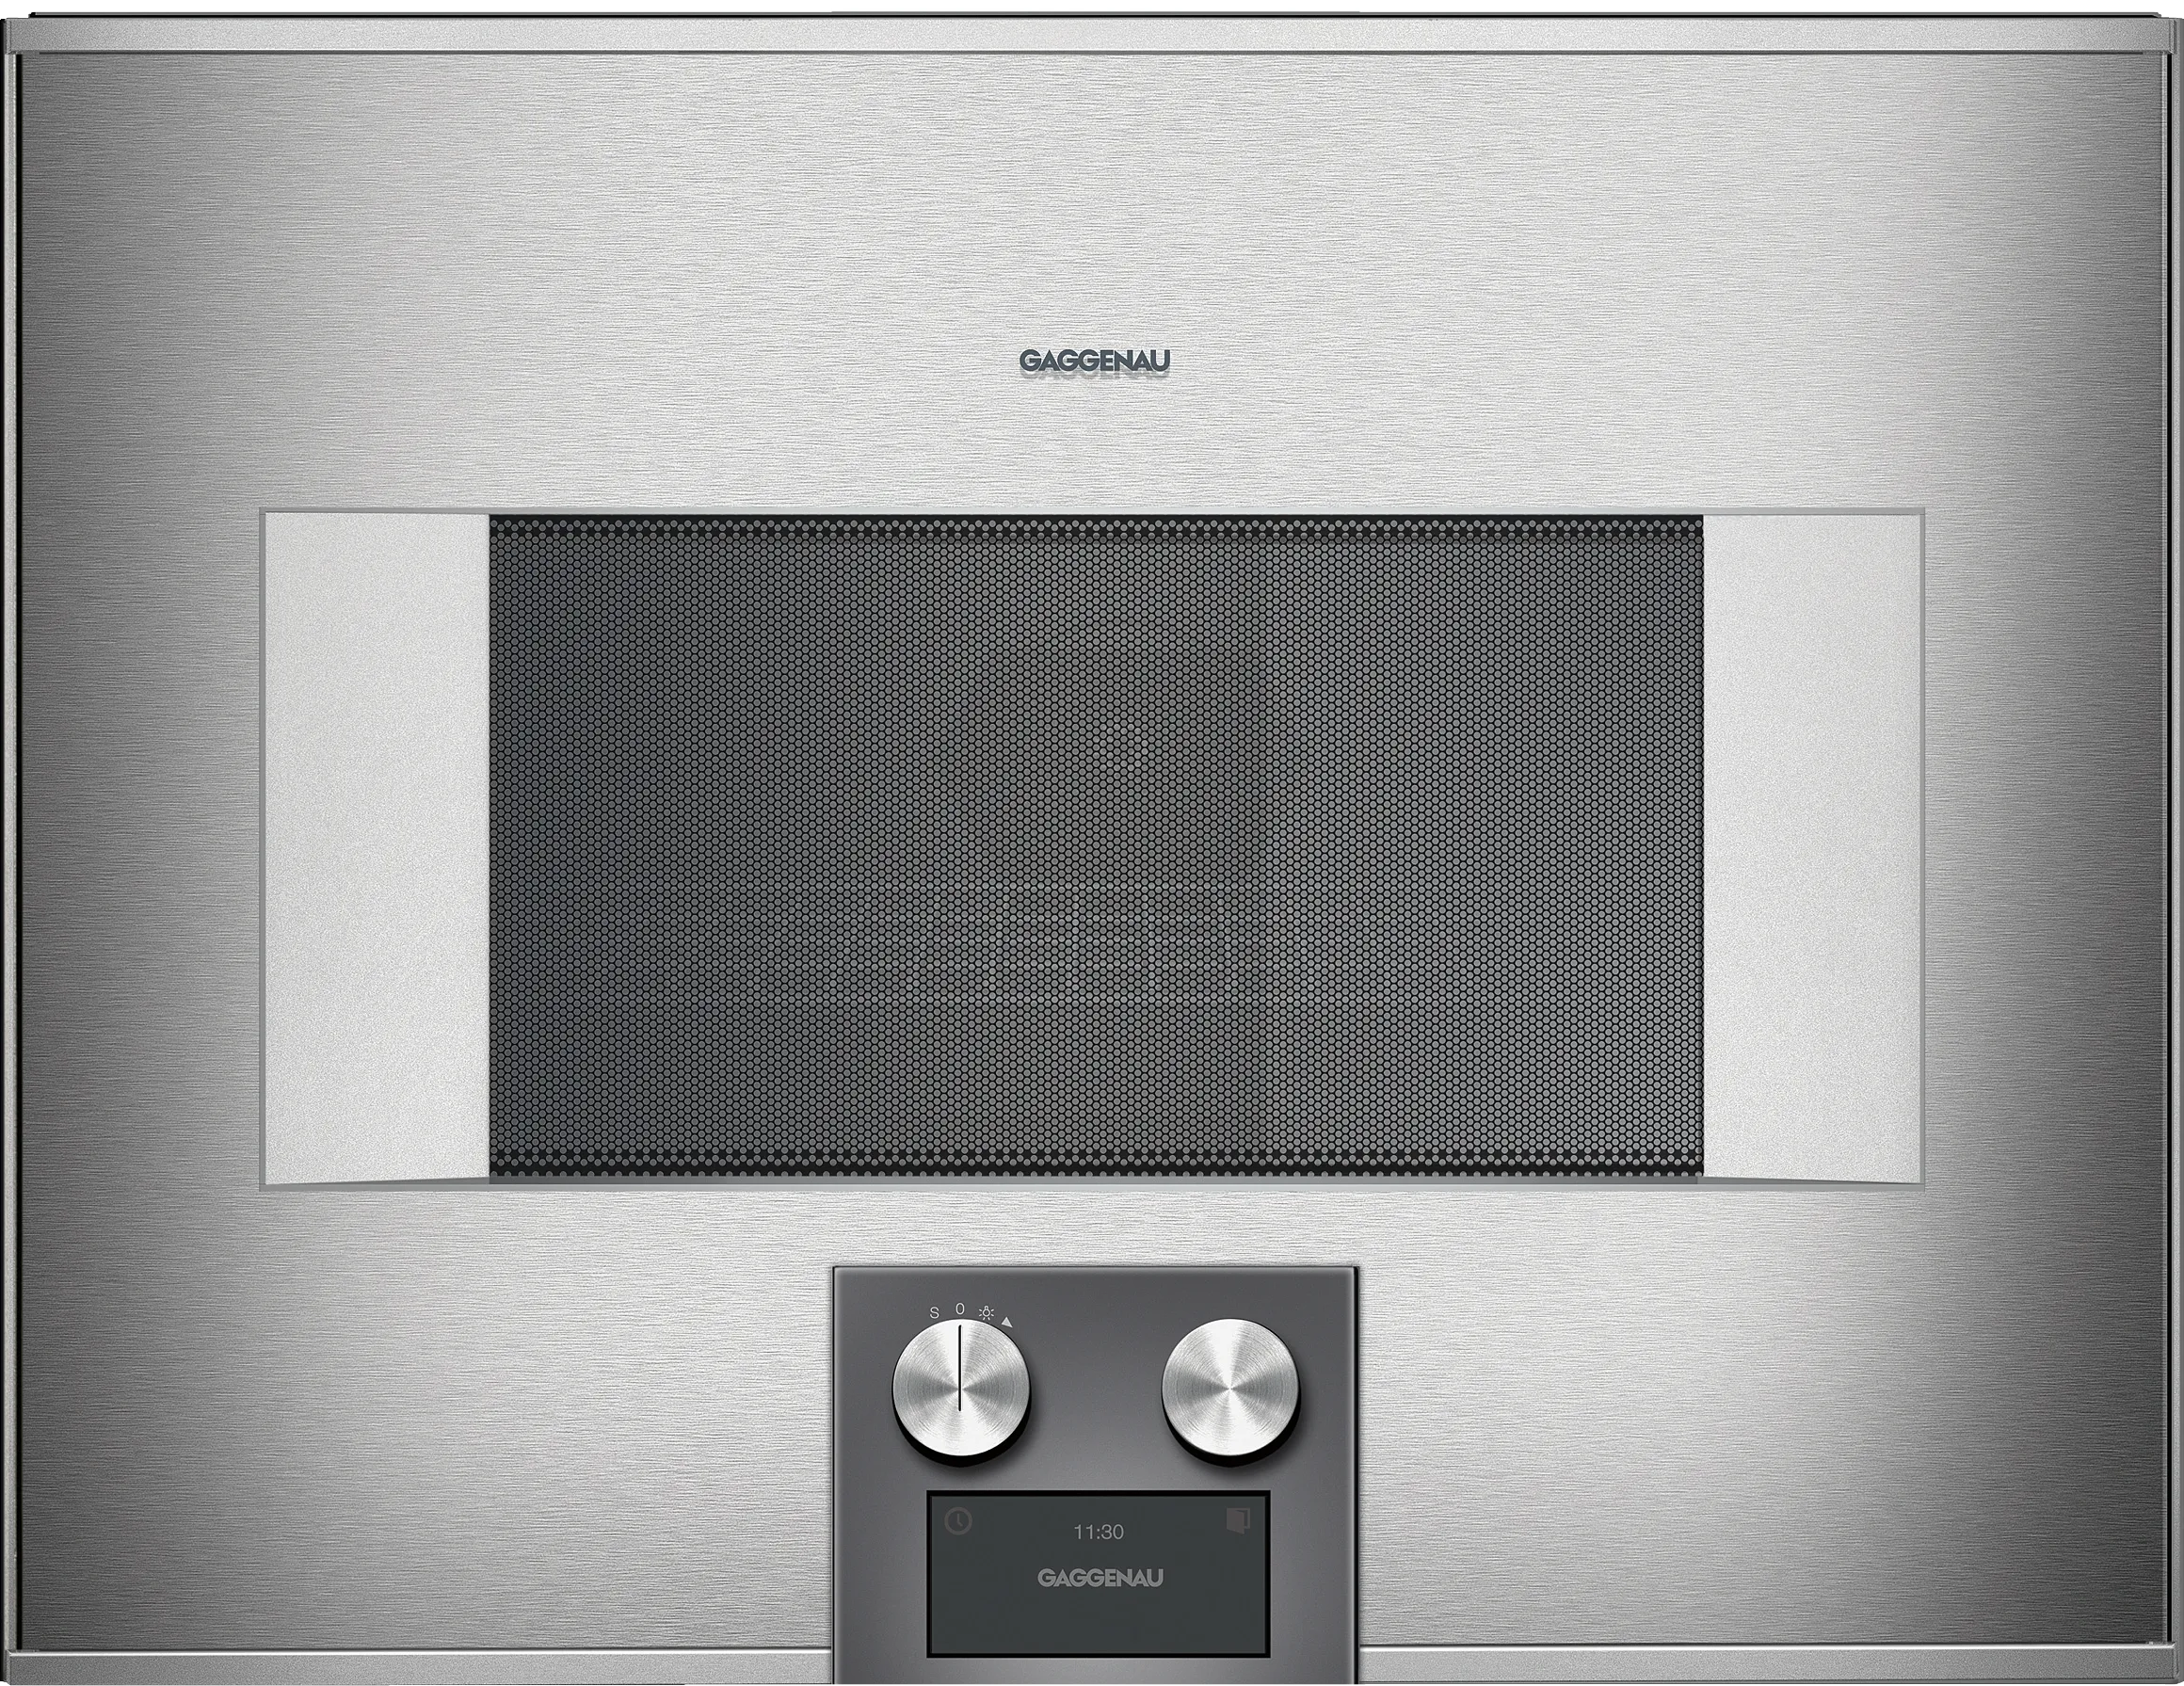 400 series built-in compact oven with microwave function 60 x 45 cm Door hinge: Right, Stainless steel behind glass 